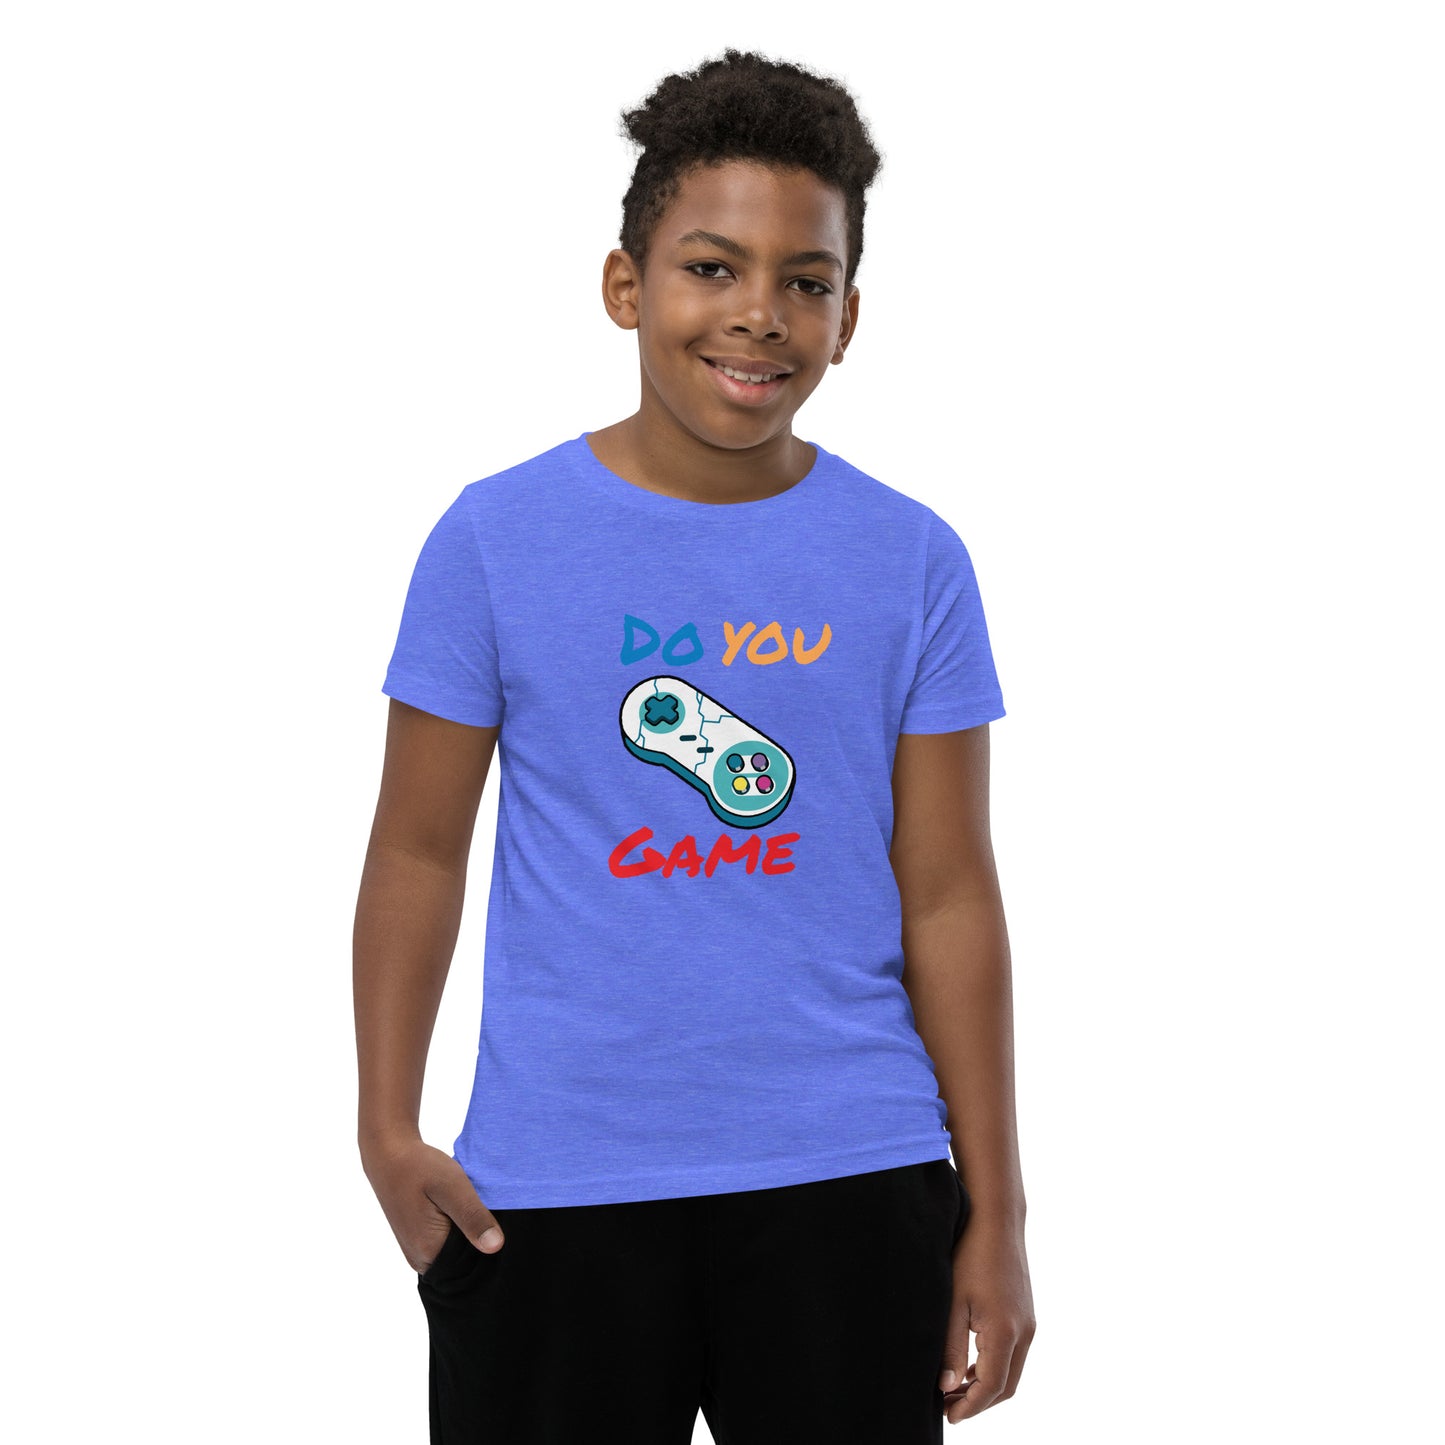 Do You Game Youth Short Sleeve T-Shirt